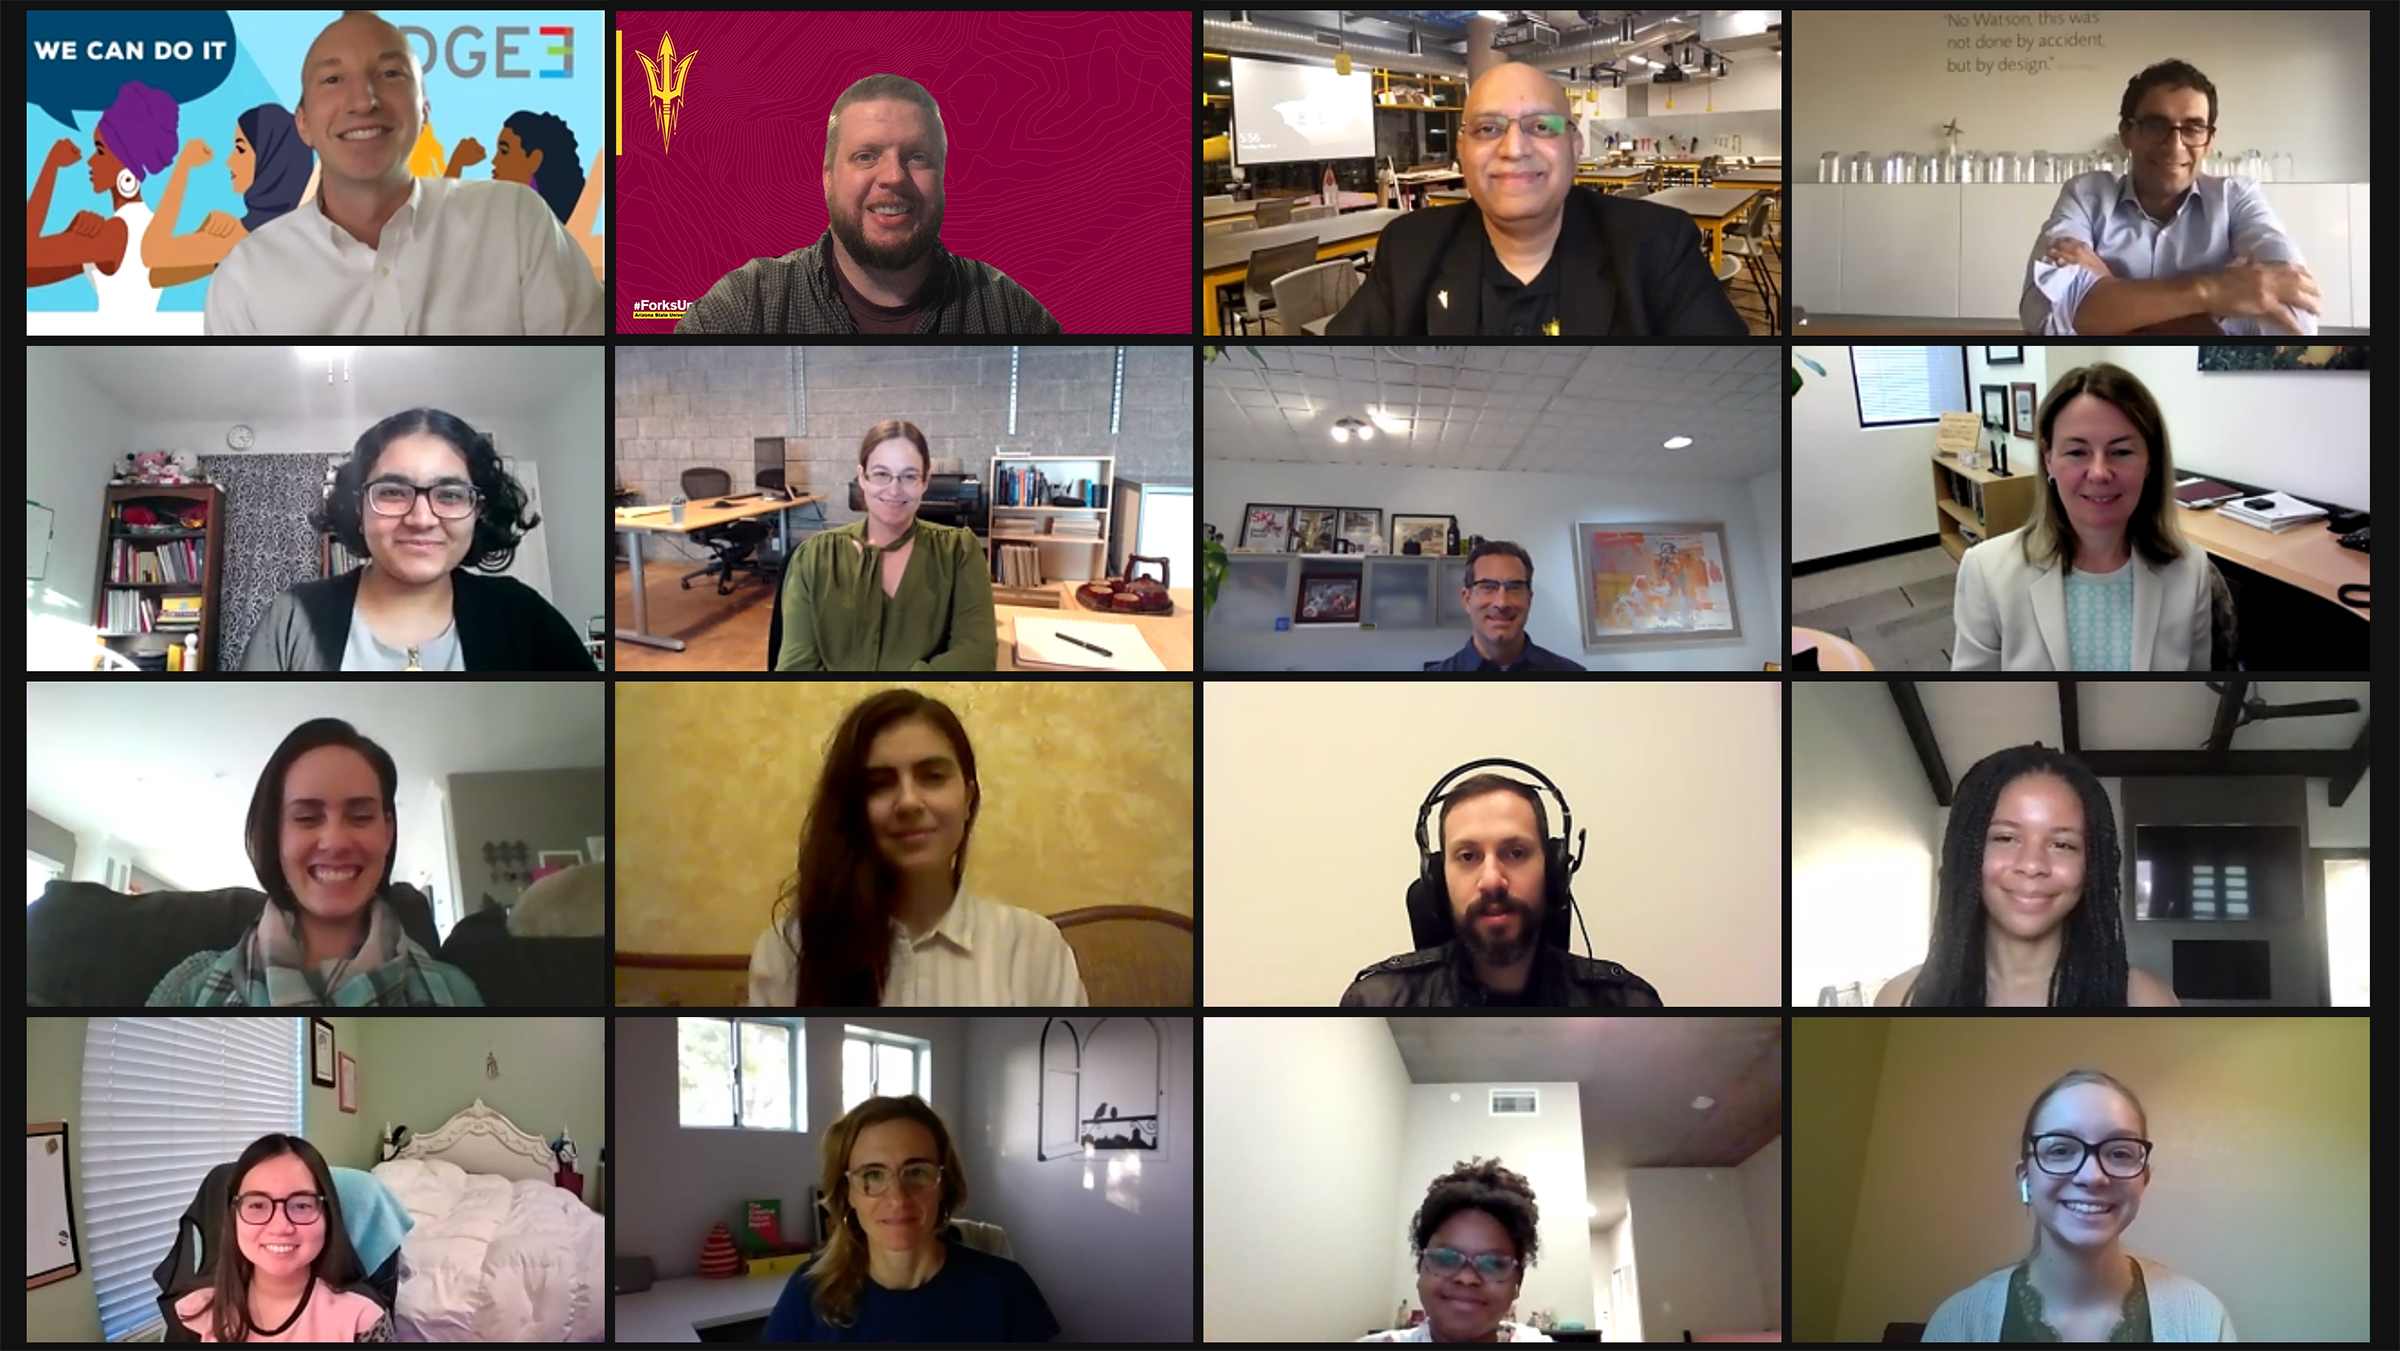 A screenshot of a Zoom meeting of the EDGE3 Women in Computing Scholars virtual event